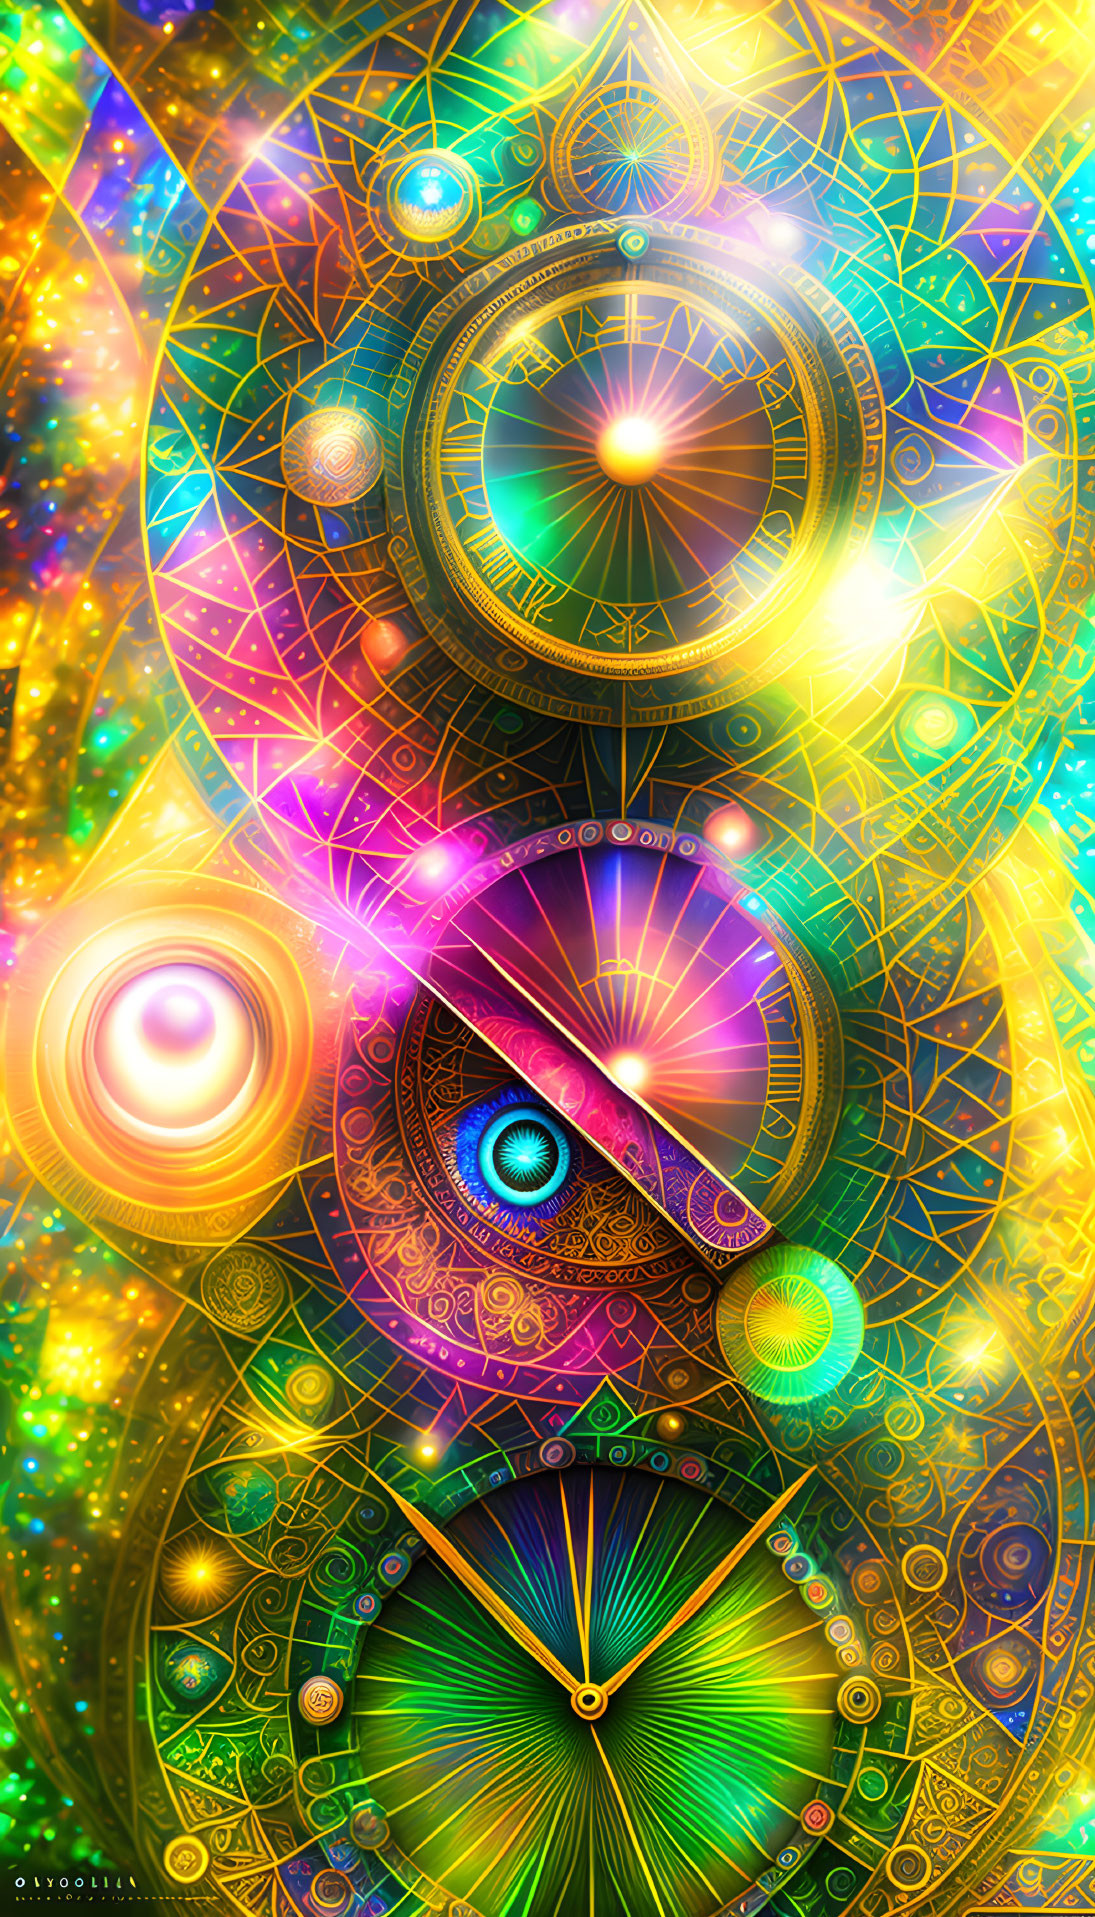 Colorful Psychedelic Digital Art with Geometric Patterns and All-Seeing Eye